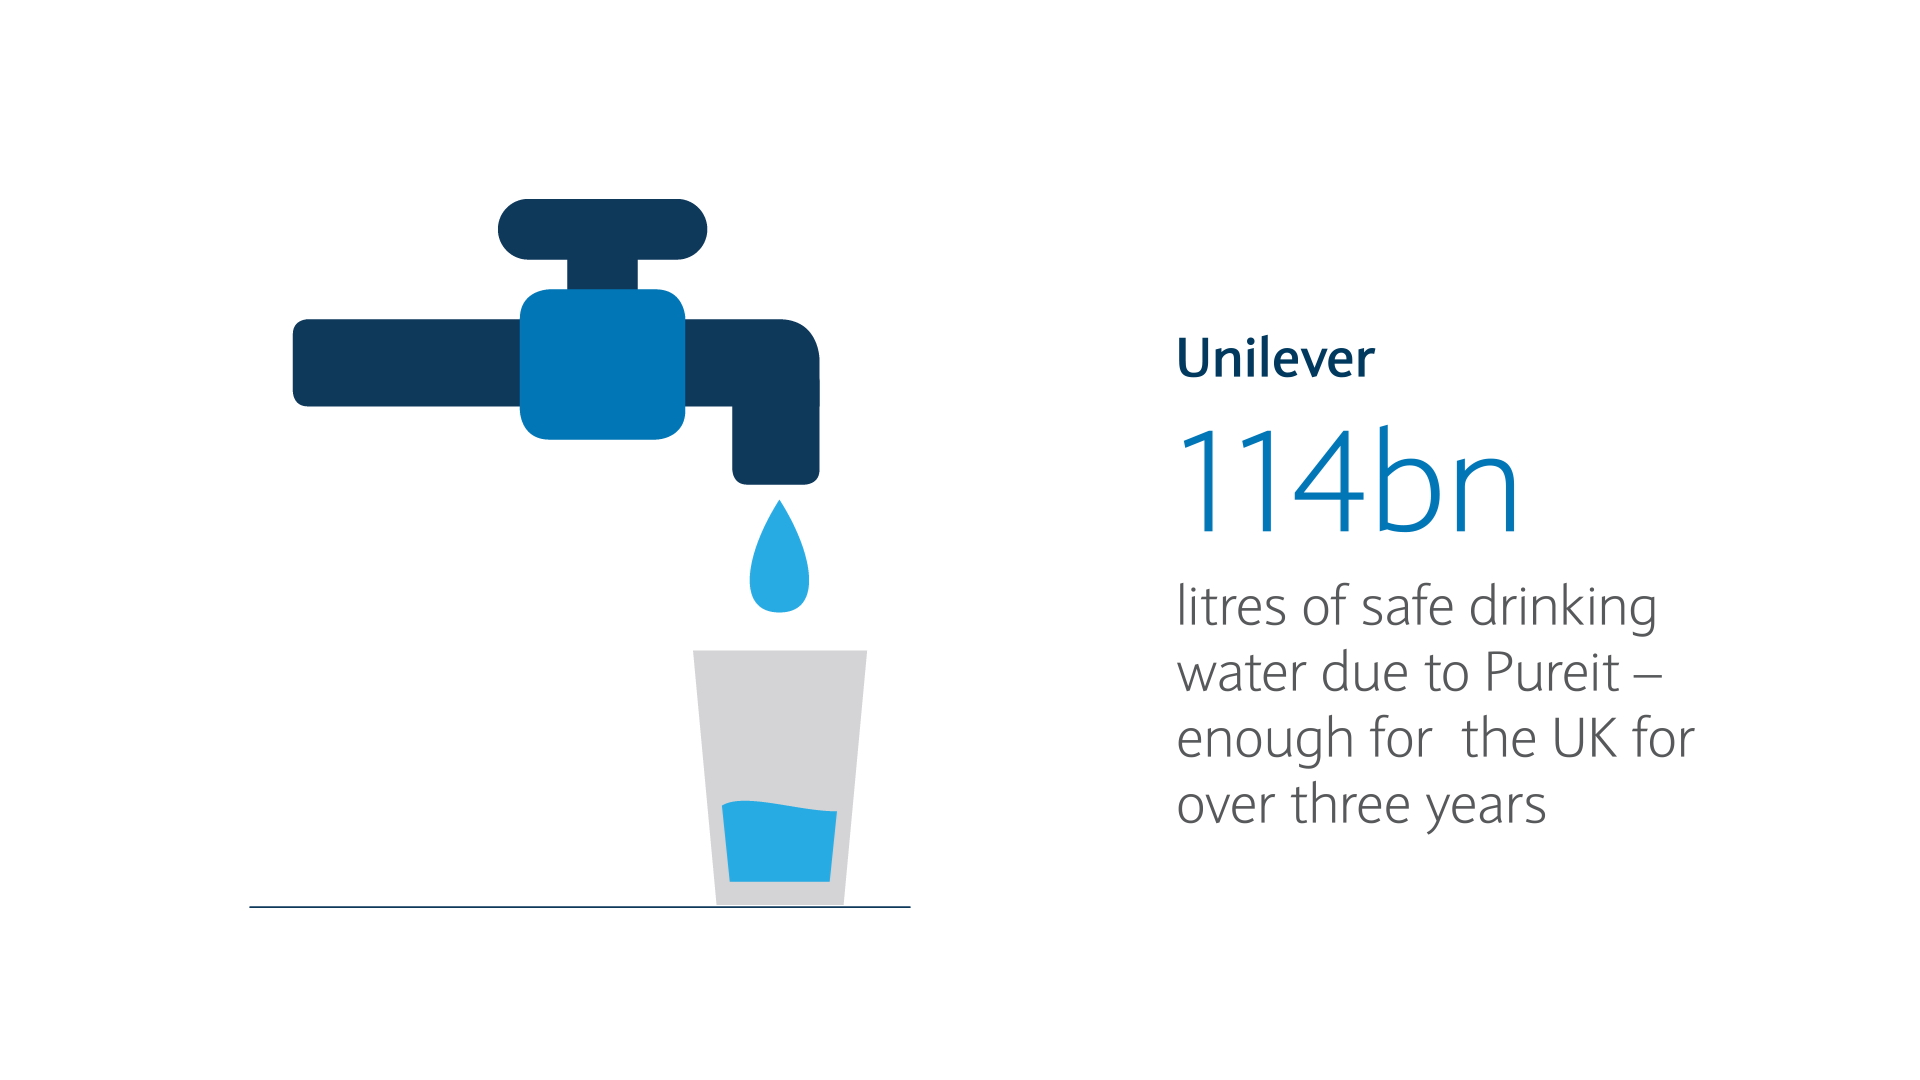 114bn litres of safe drinking water due to Pureit - enough for the UK for over three years